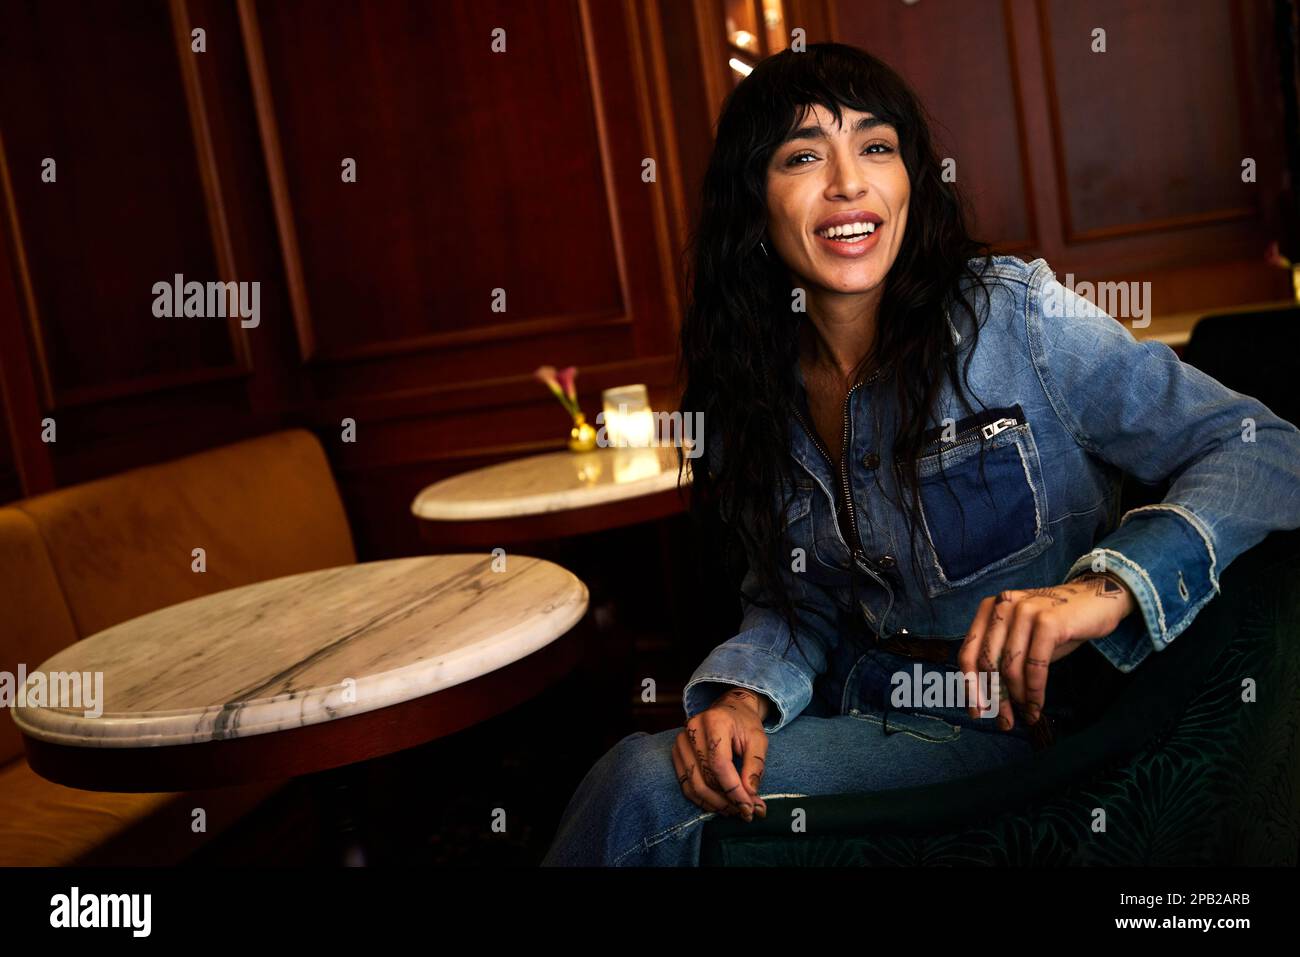 Stockholm, Sweden. 12th Mar, 2023. STOCKHOLM 20230312Swedish singer Loreen (Lorine Talhaoui) during an interview they day after she won the Melodifestivalen song contest with her song 'Tattoo', in Stockholm, Sweden, on March 12, 2023. Loreen will represent Sweden in the Eurovision Song Contest in Liverpool in May. Foto: Fredrik Persson / TT / kod 1081 Credit: TT News Agency/Alamy Live News Stock Photo